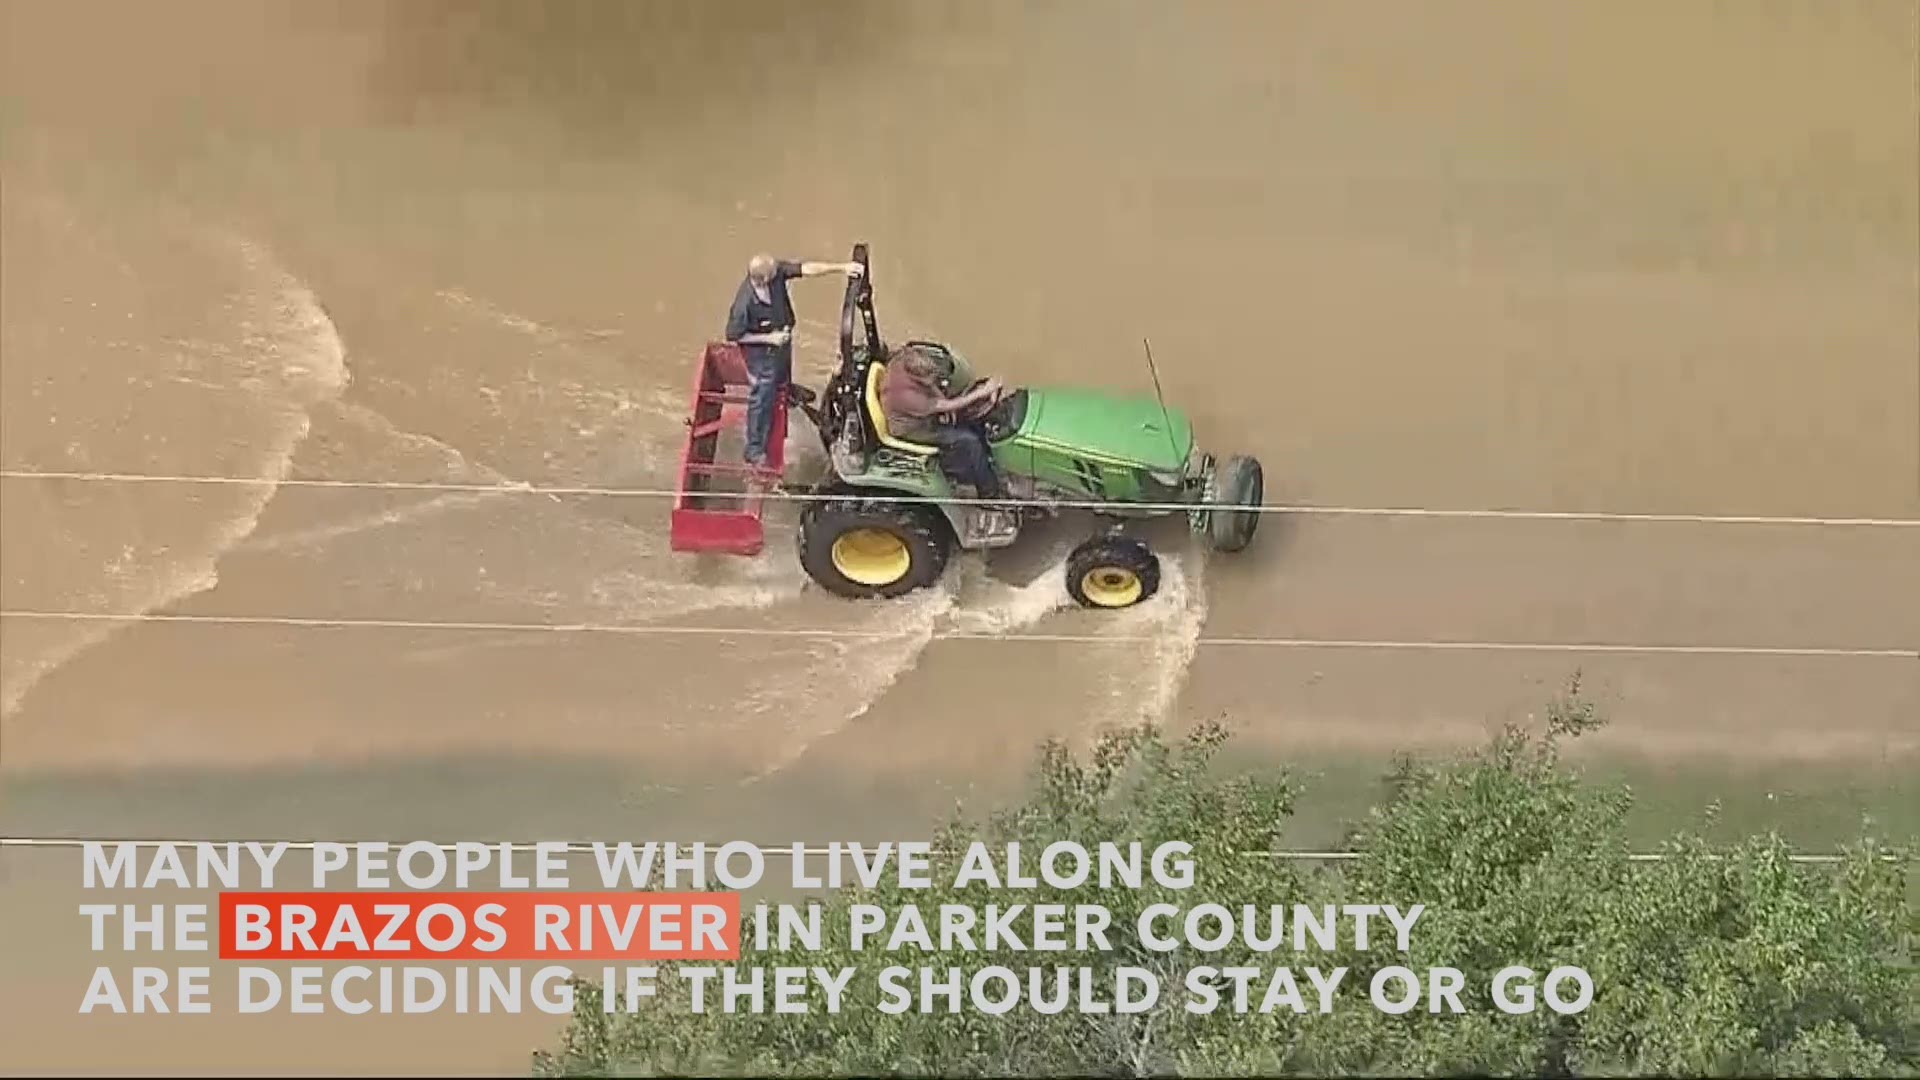 Parker County residents are bracing for the worst flooding they've seen in years. Some are being forced to consider leaving their homes.